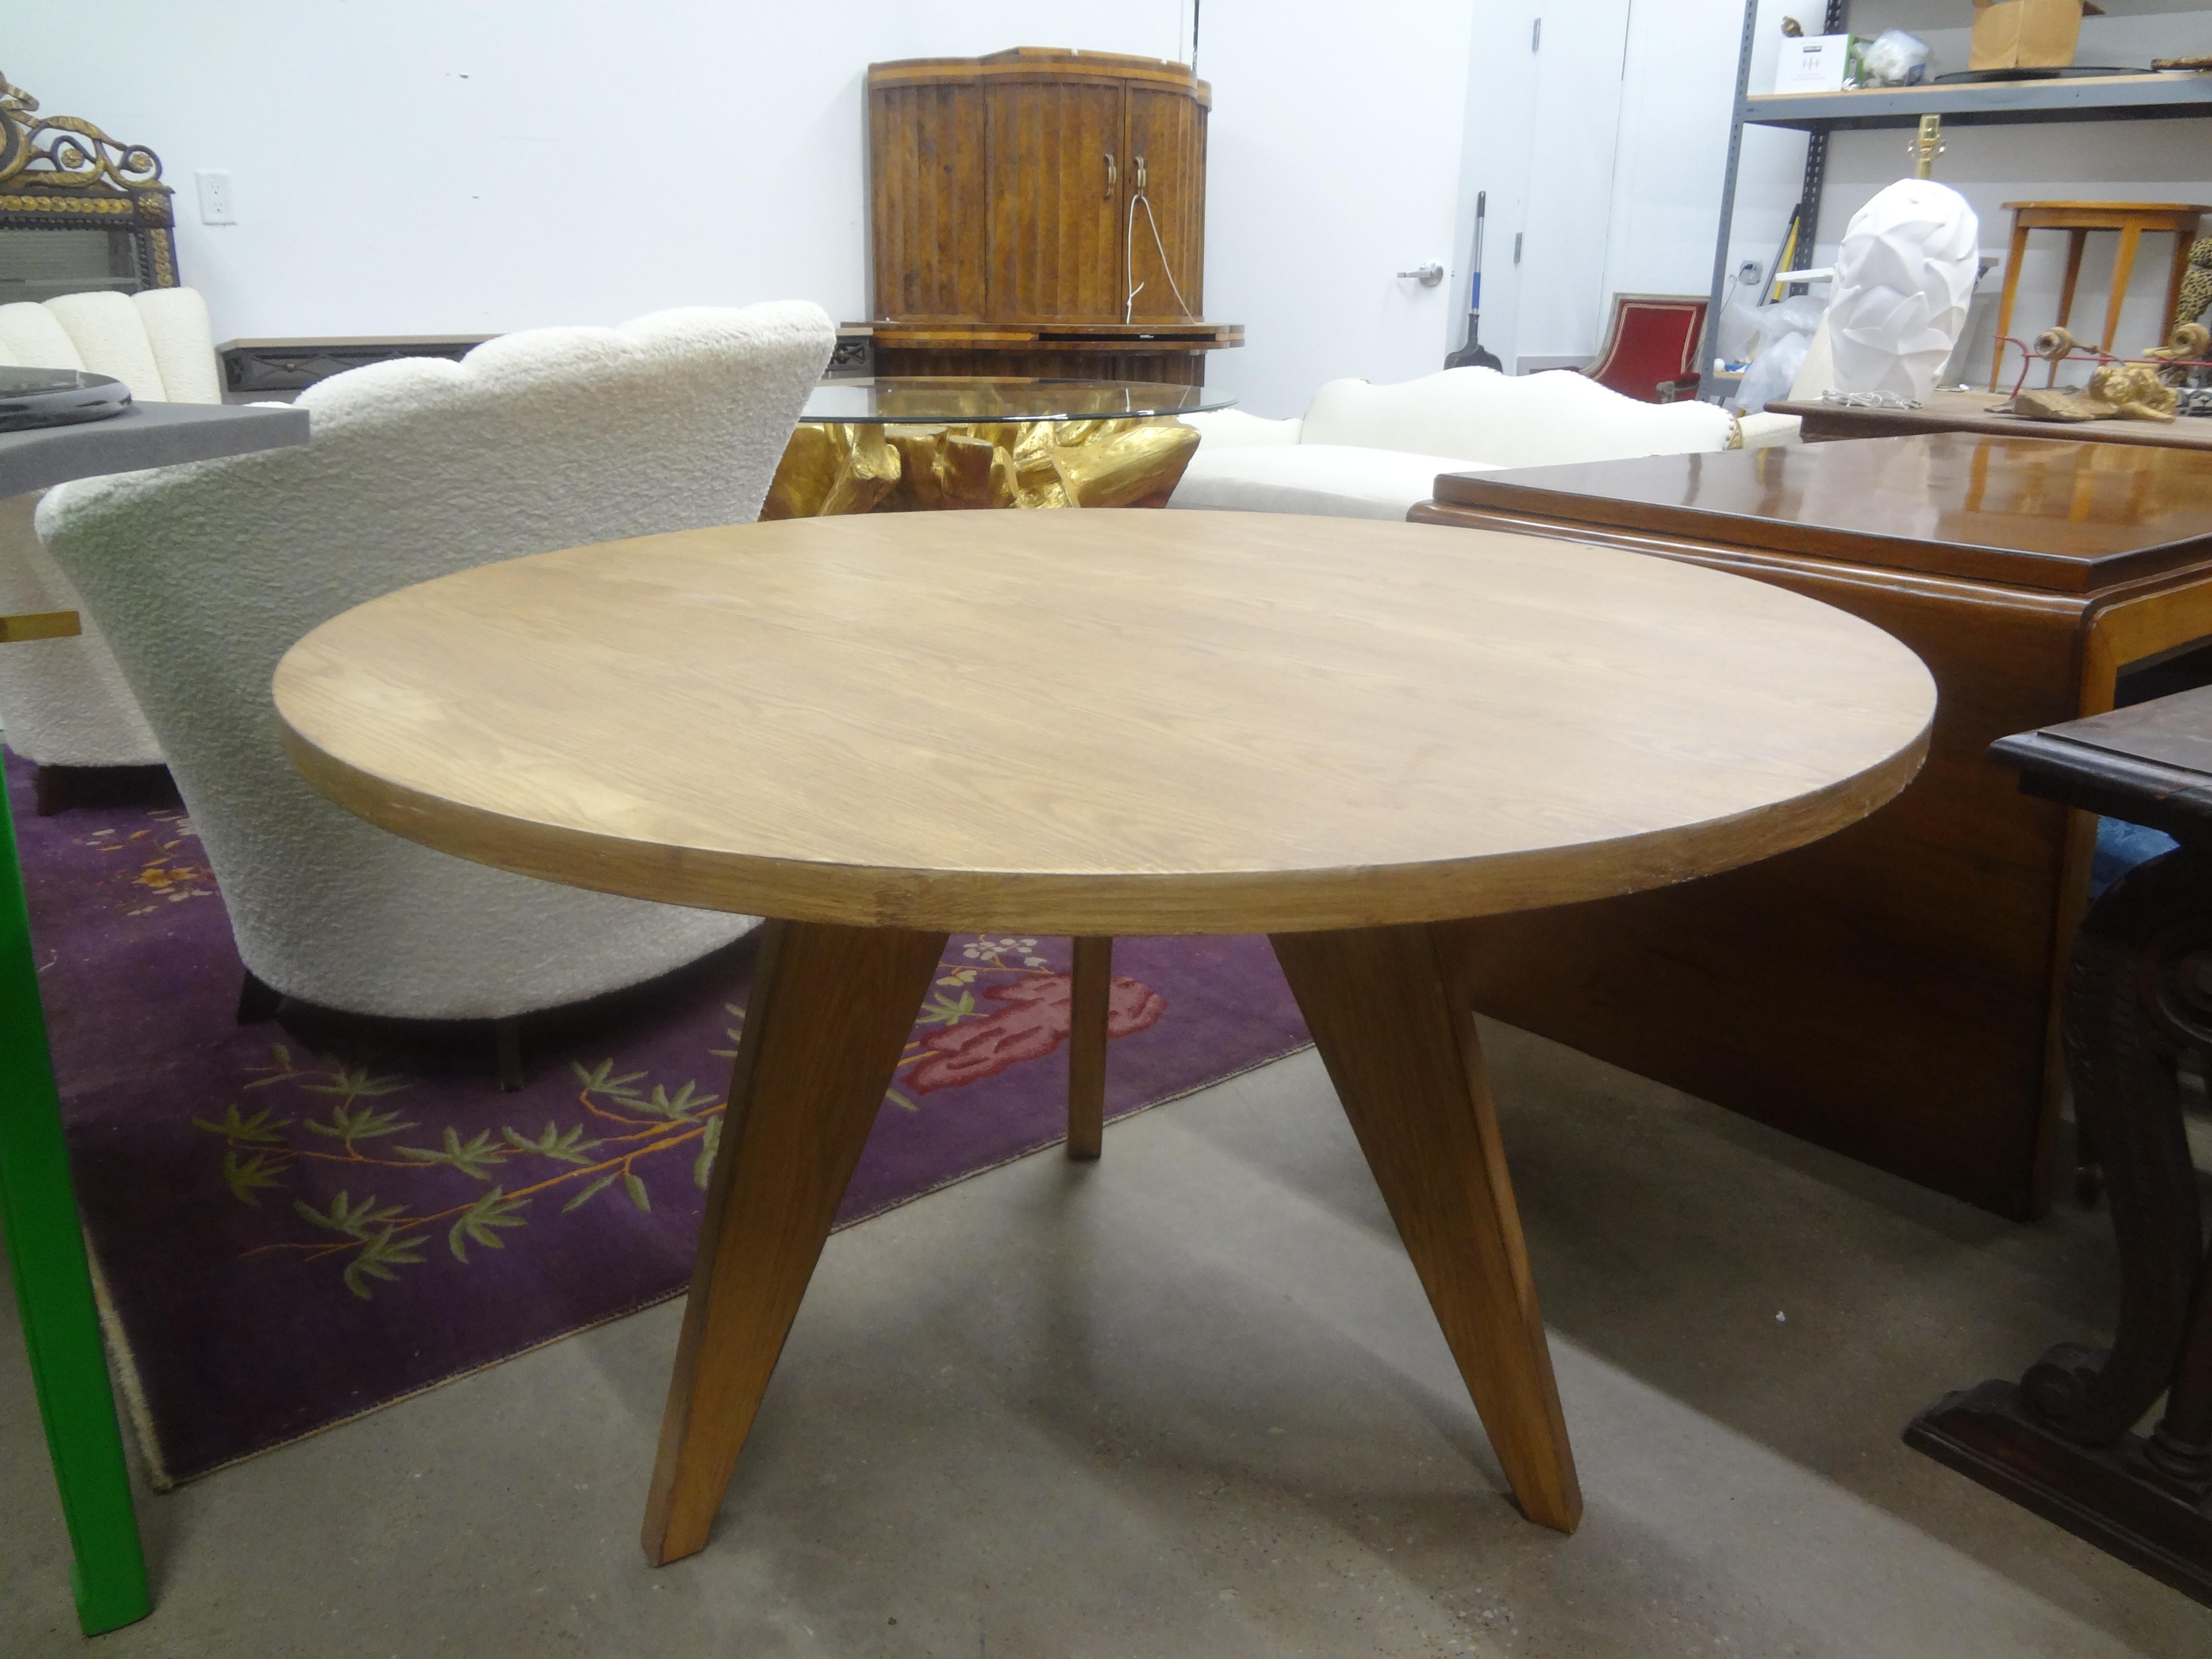 French Modern Pierre Chapo Inspired Elm And Iron Center Table. This versatile French mid century elm and wrought iron center table or dining table with beautiful tripod legs will work well in a variety of interiors and design themes.